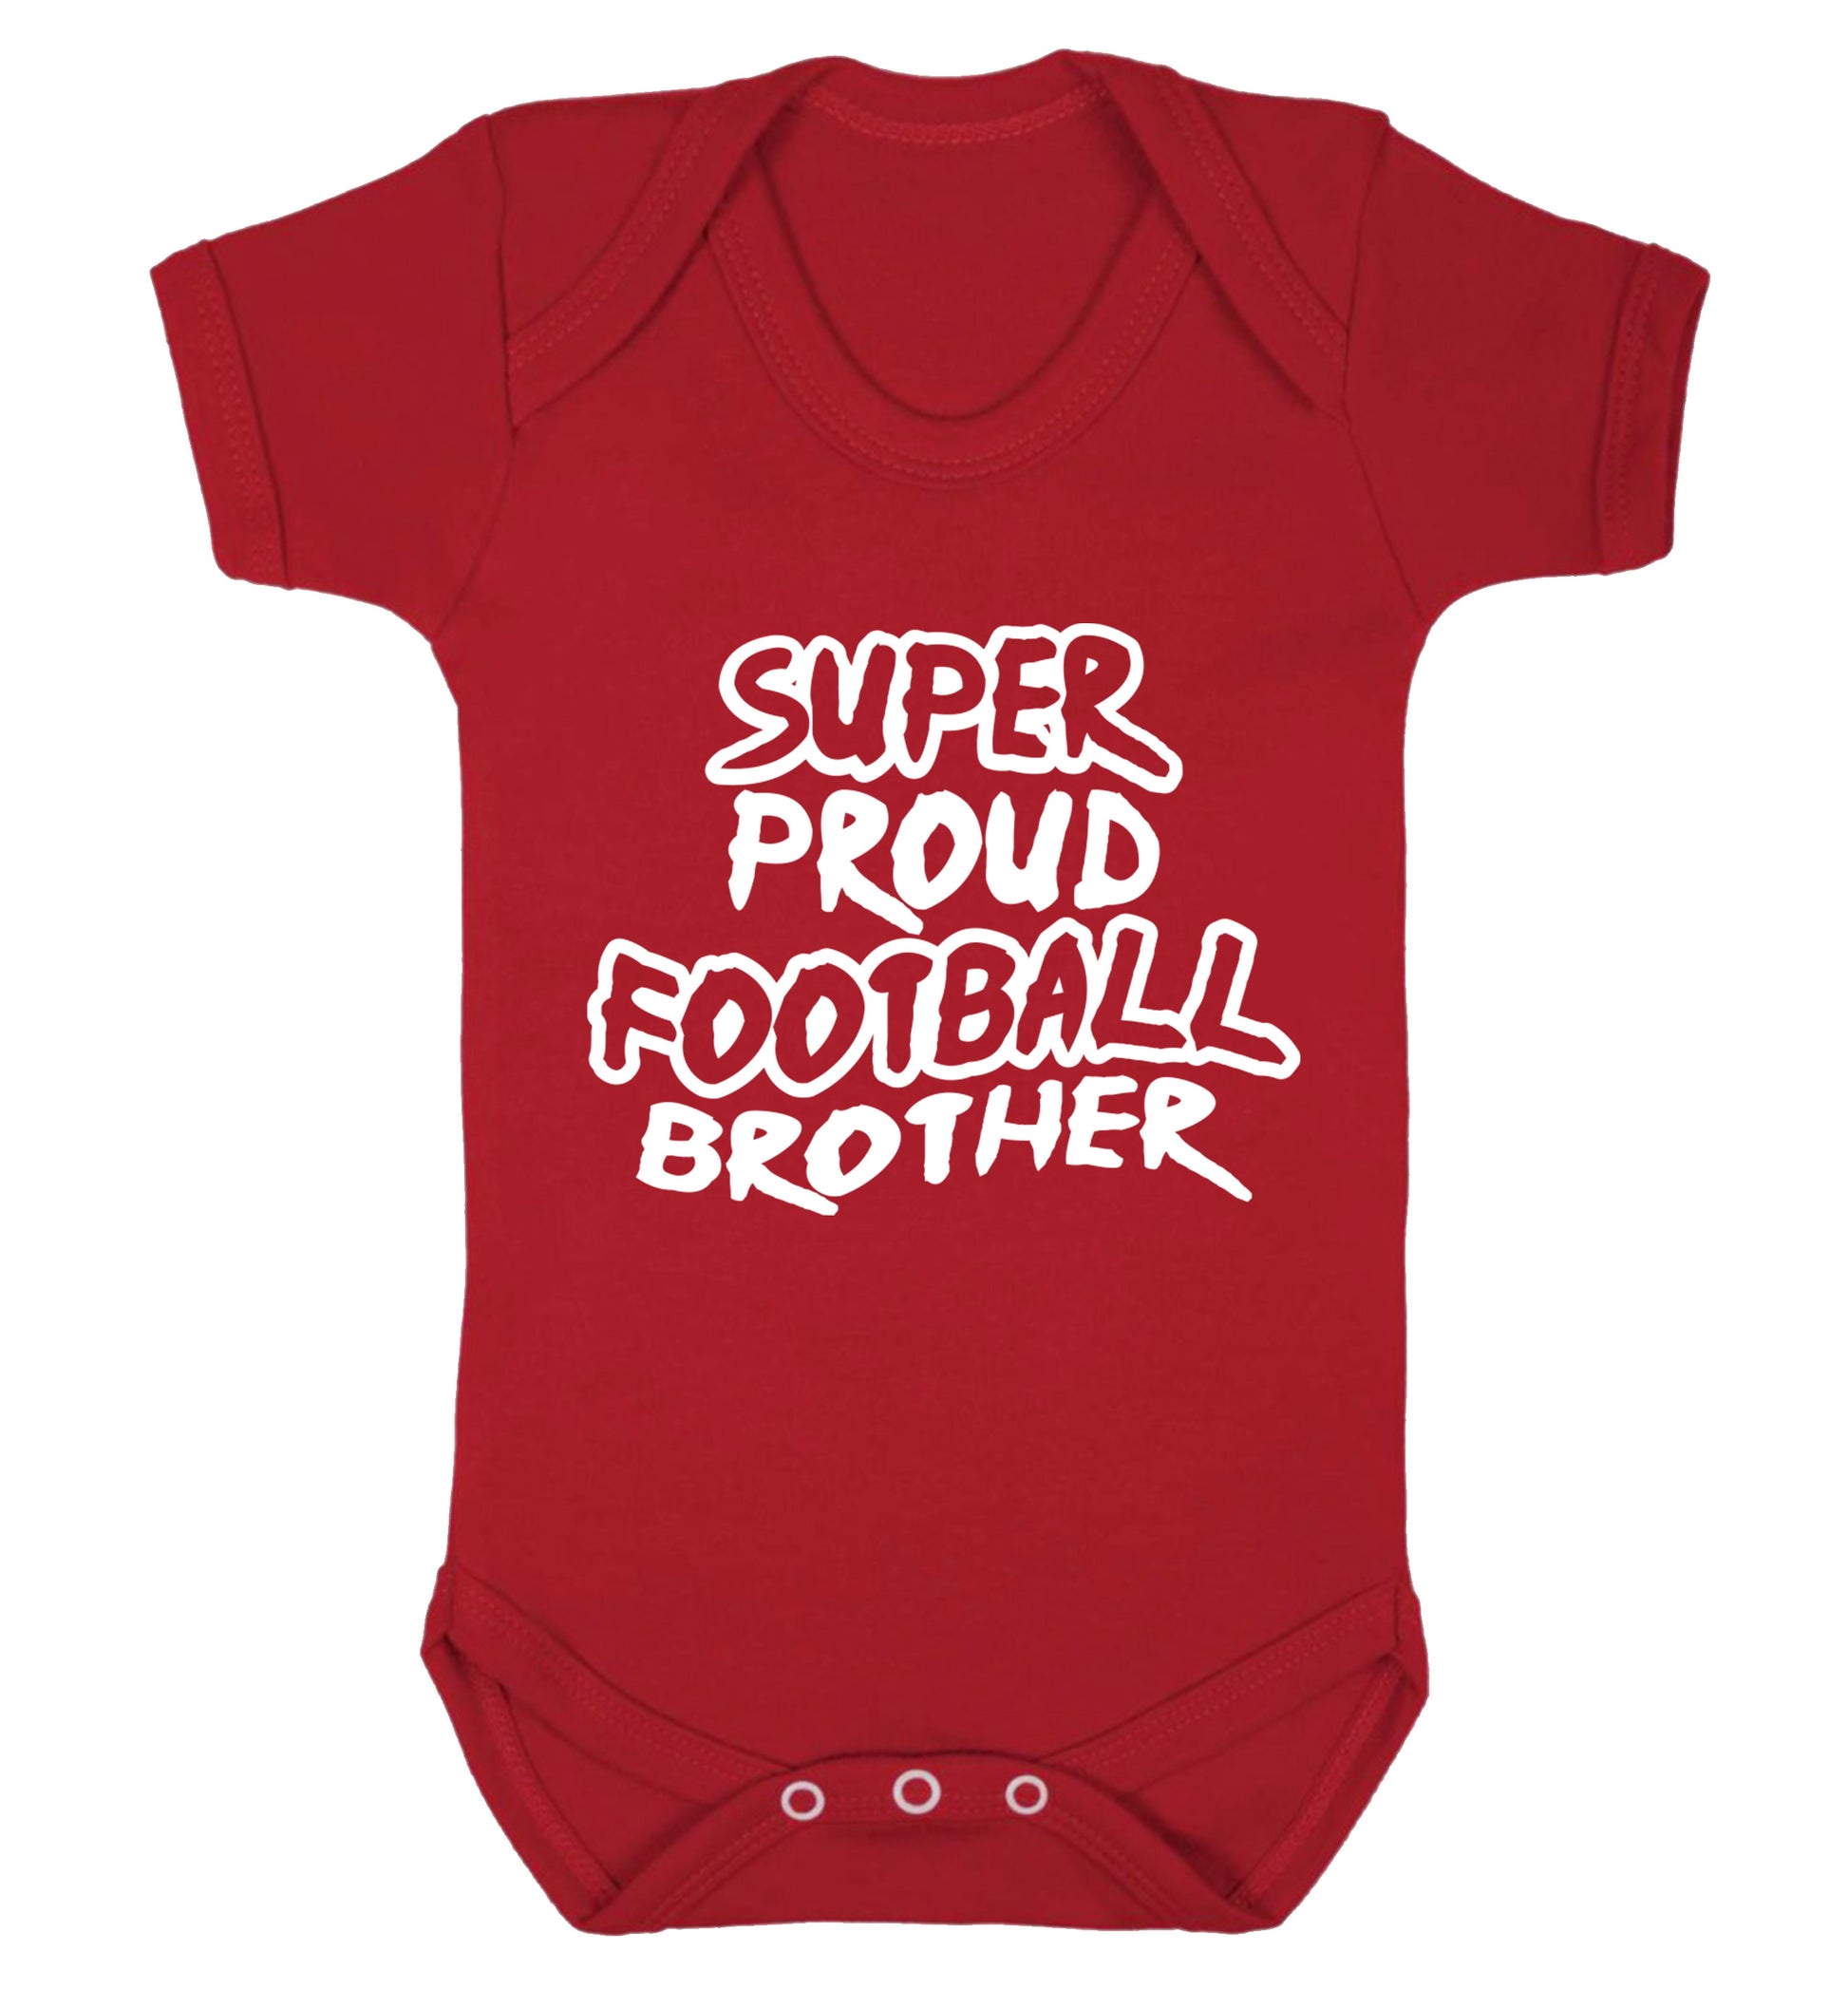 Super proud football brother Baby Vest red 18-24 months